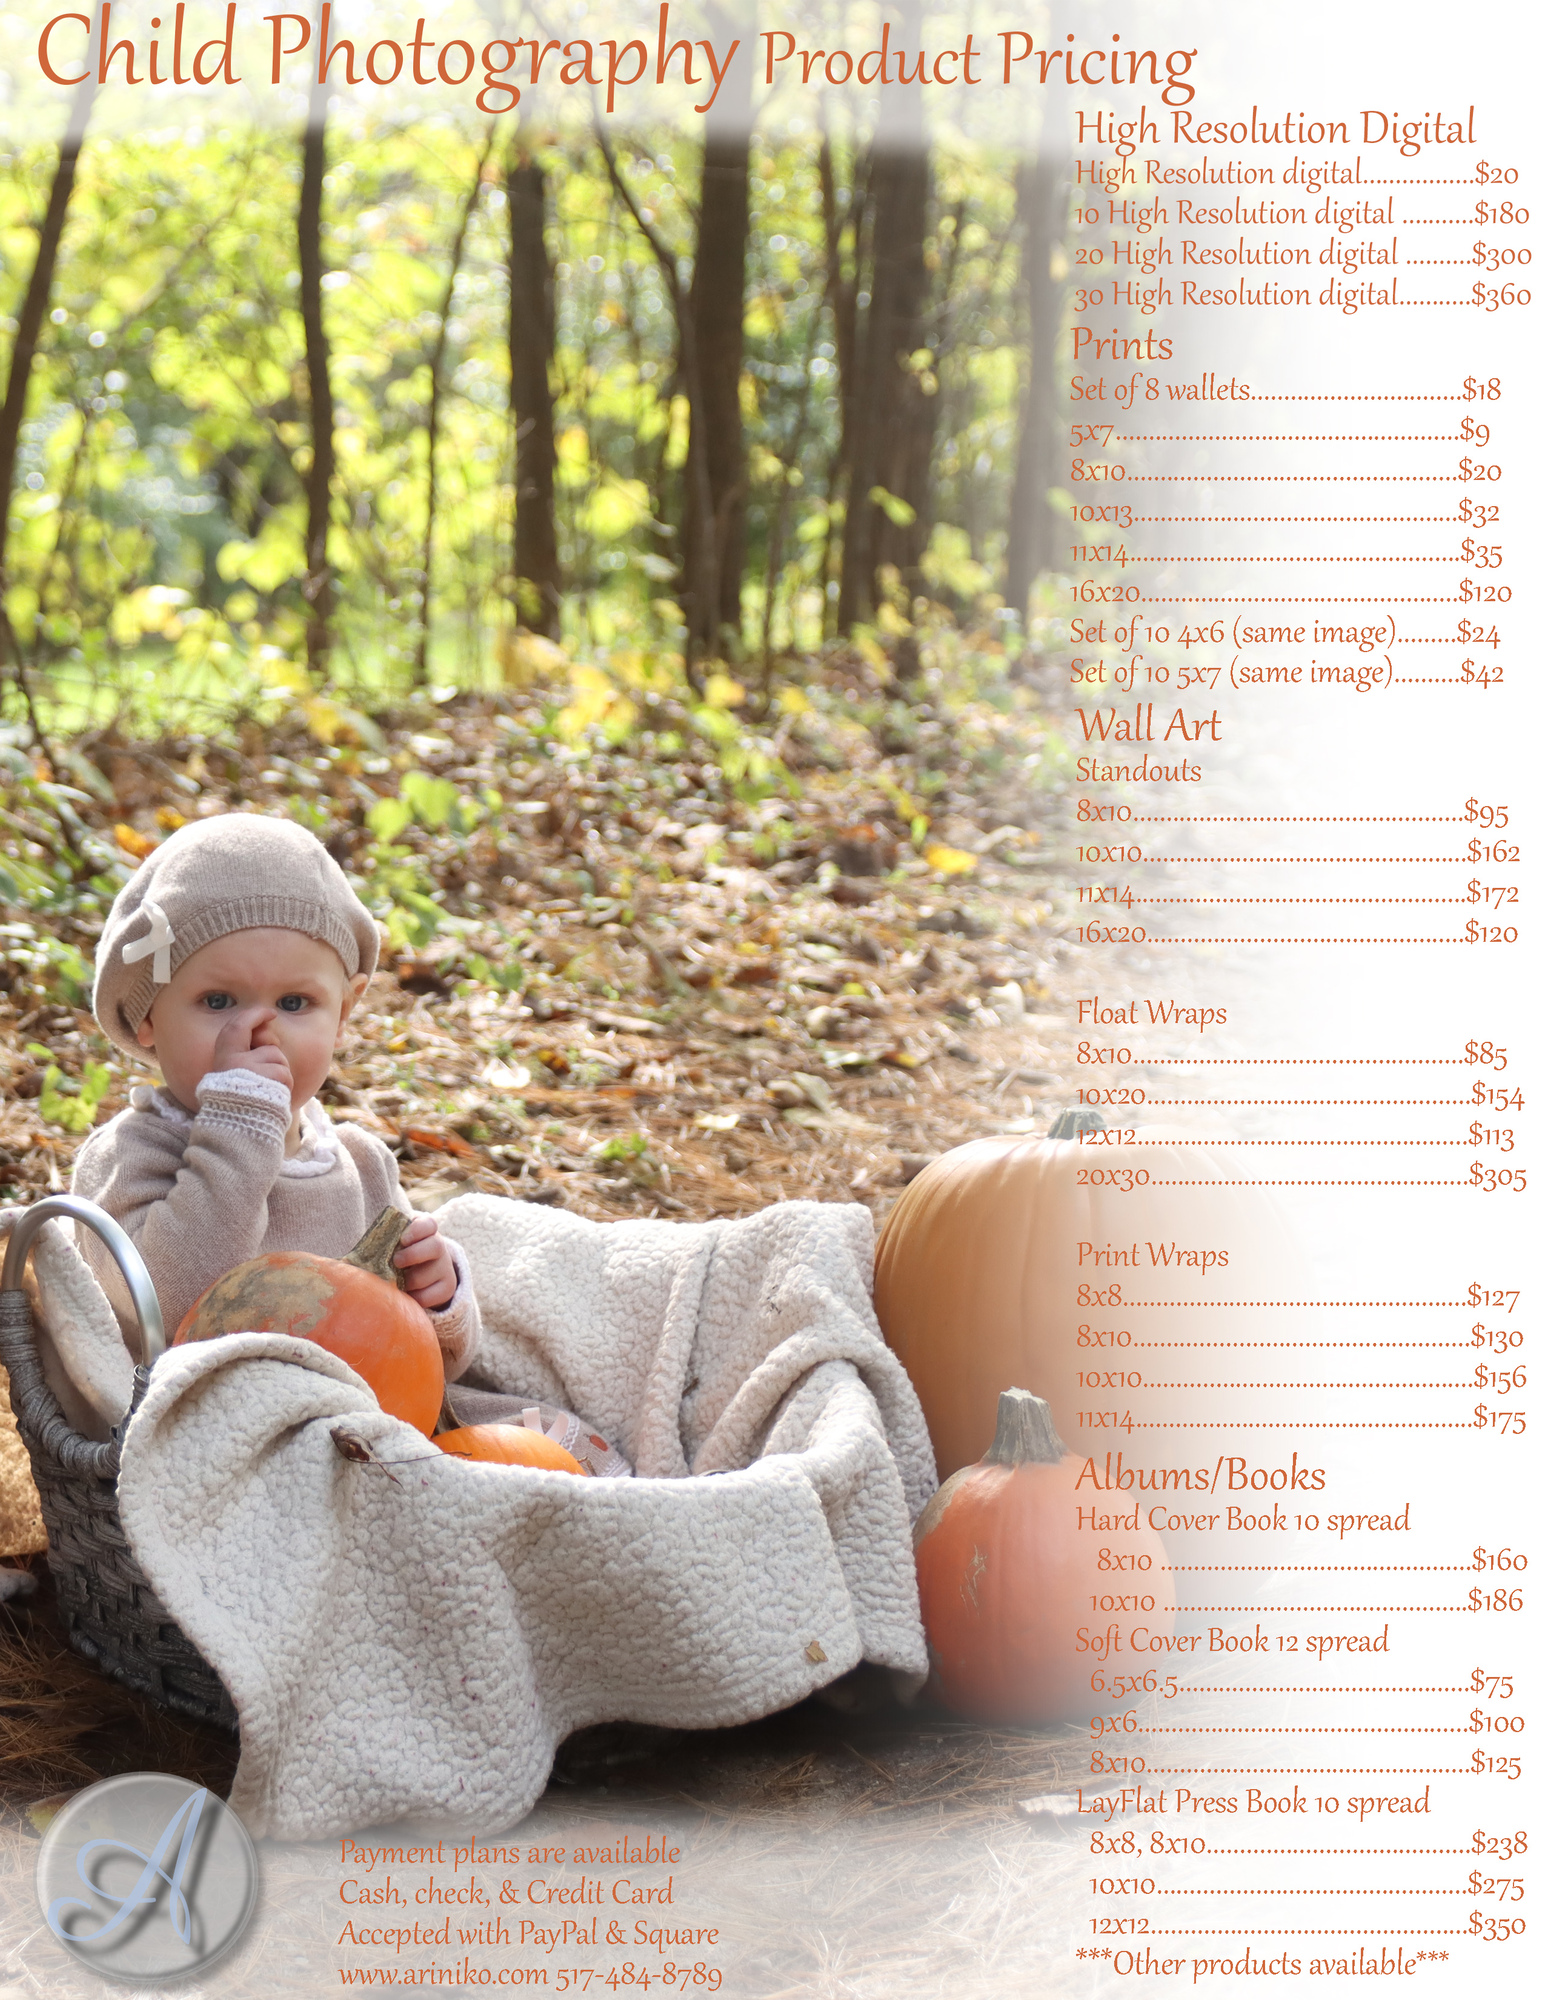 Child Photography Product Pricing Guide. A little girl in a beige hat and sweater dress sits in a basket surrounded by pumpkins 